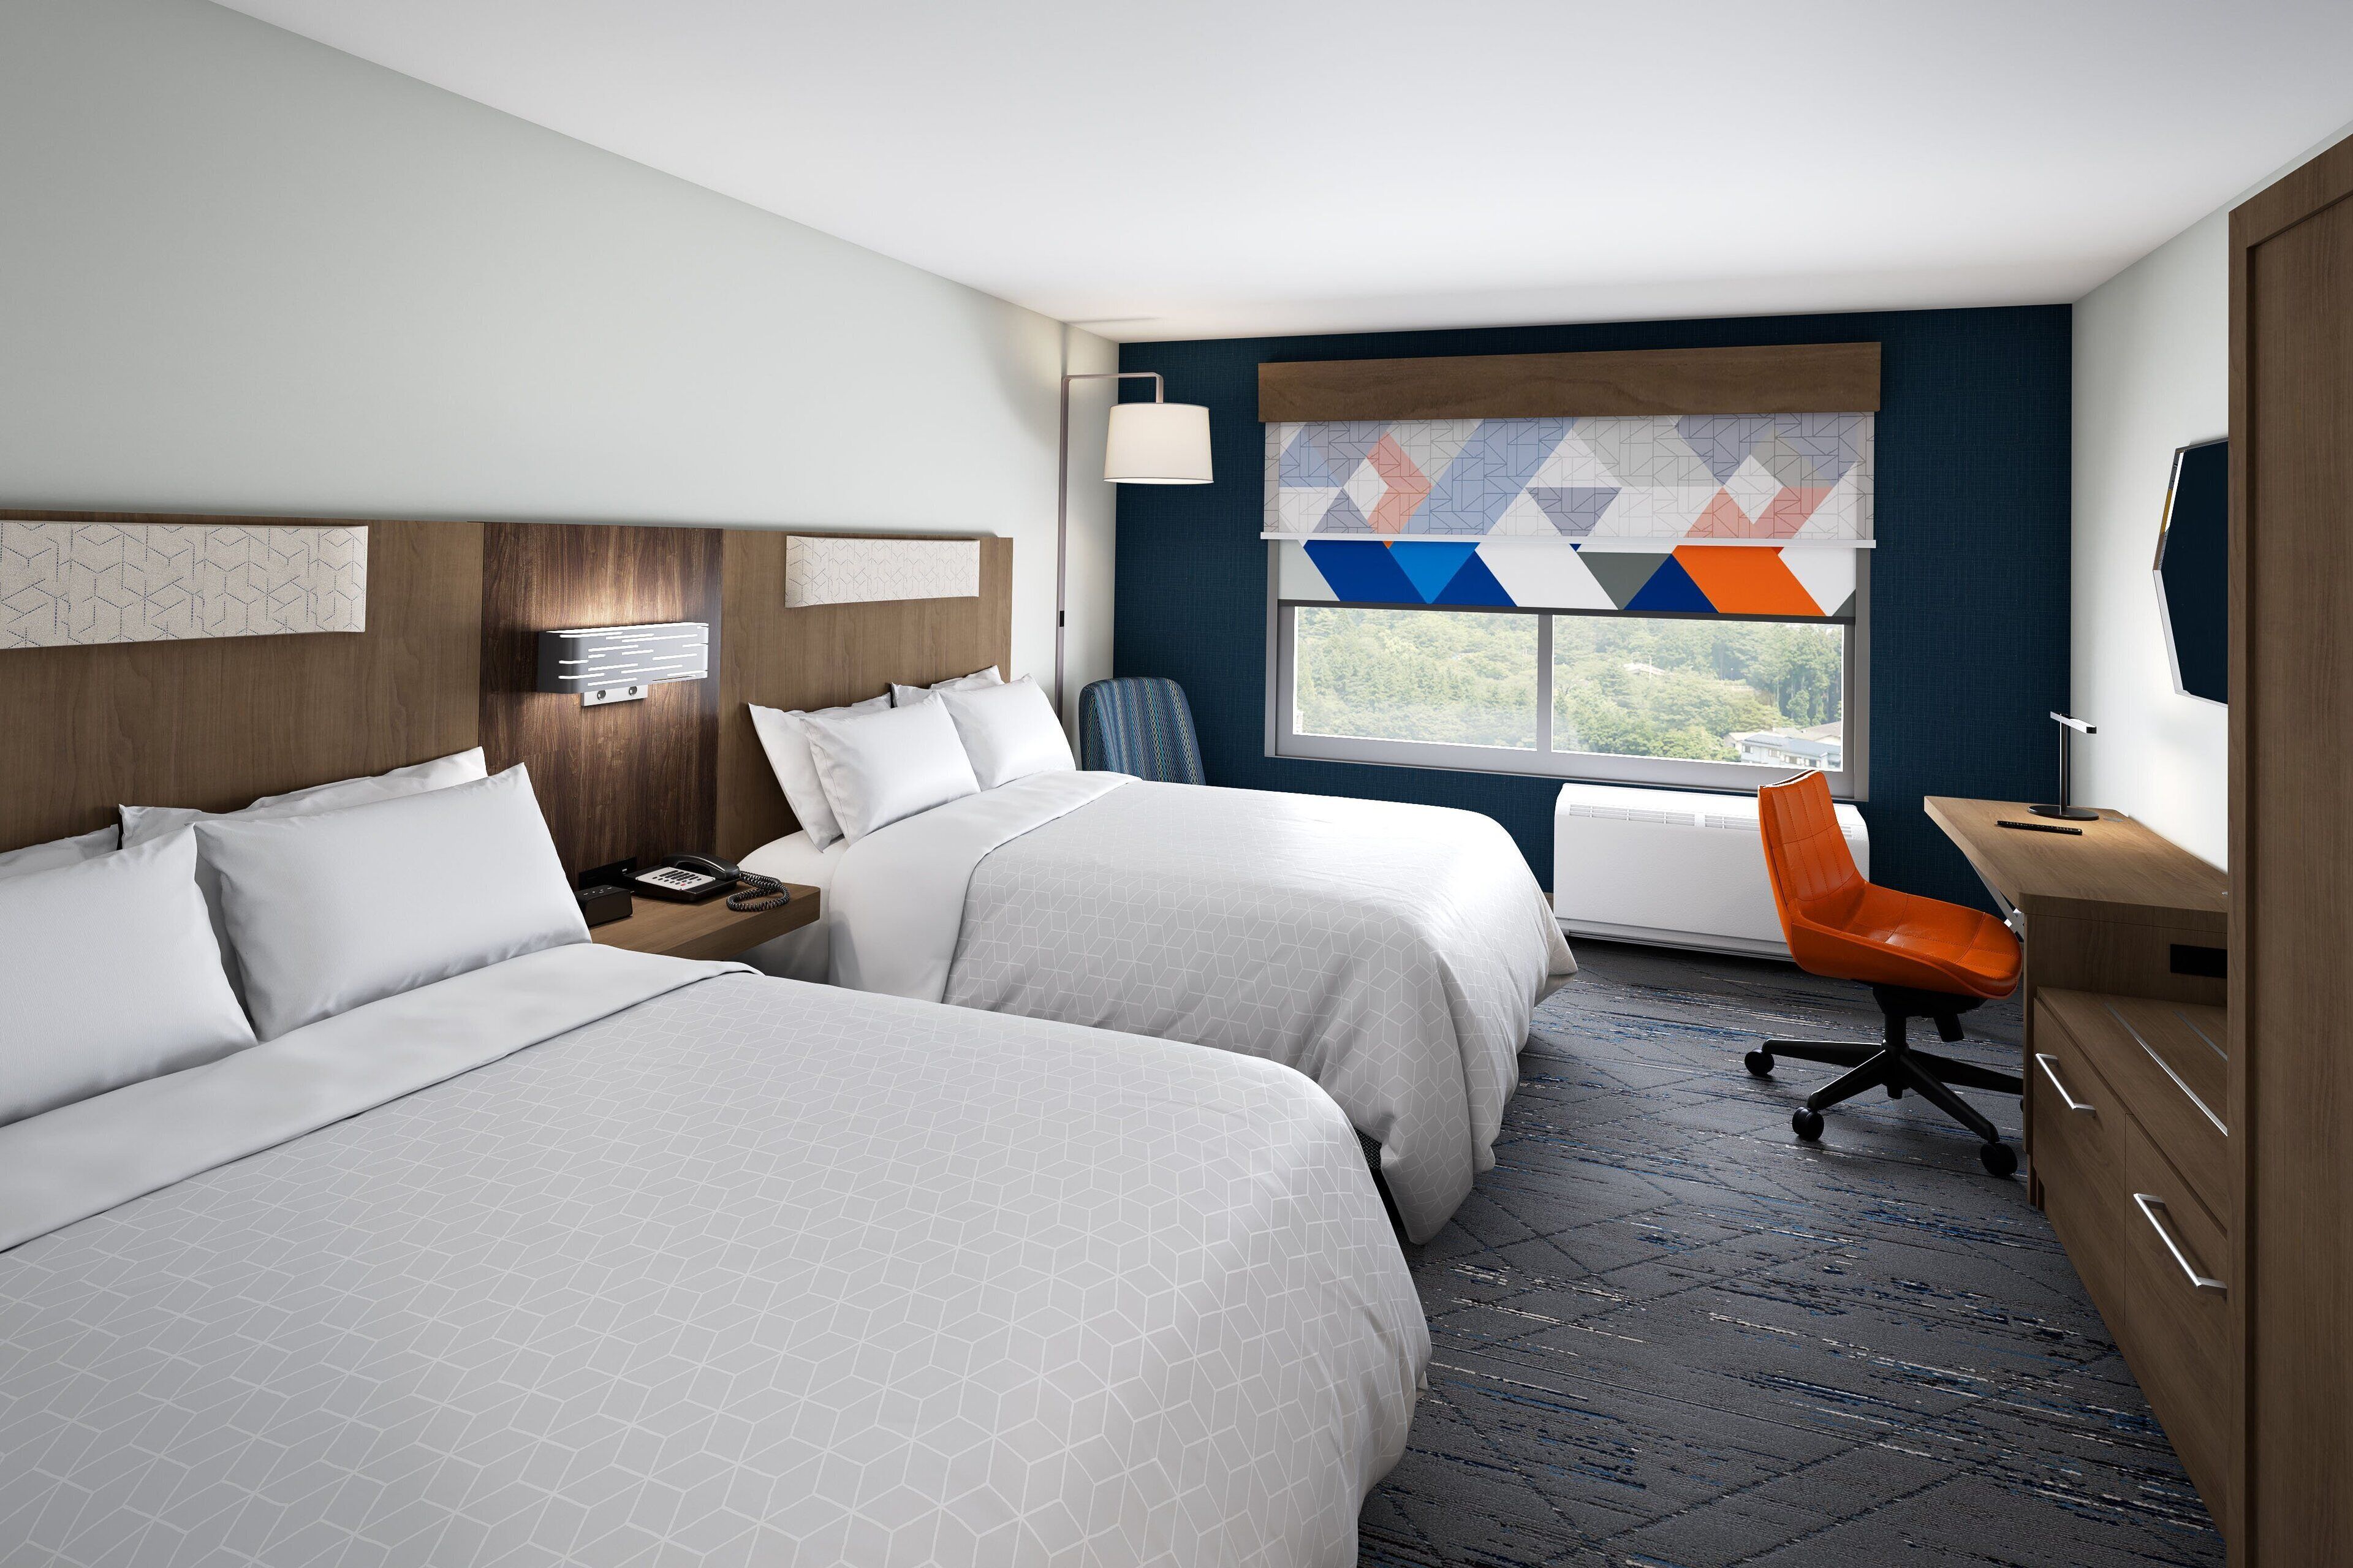 Holiday Inn Express & Suites Bronx - NYC